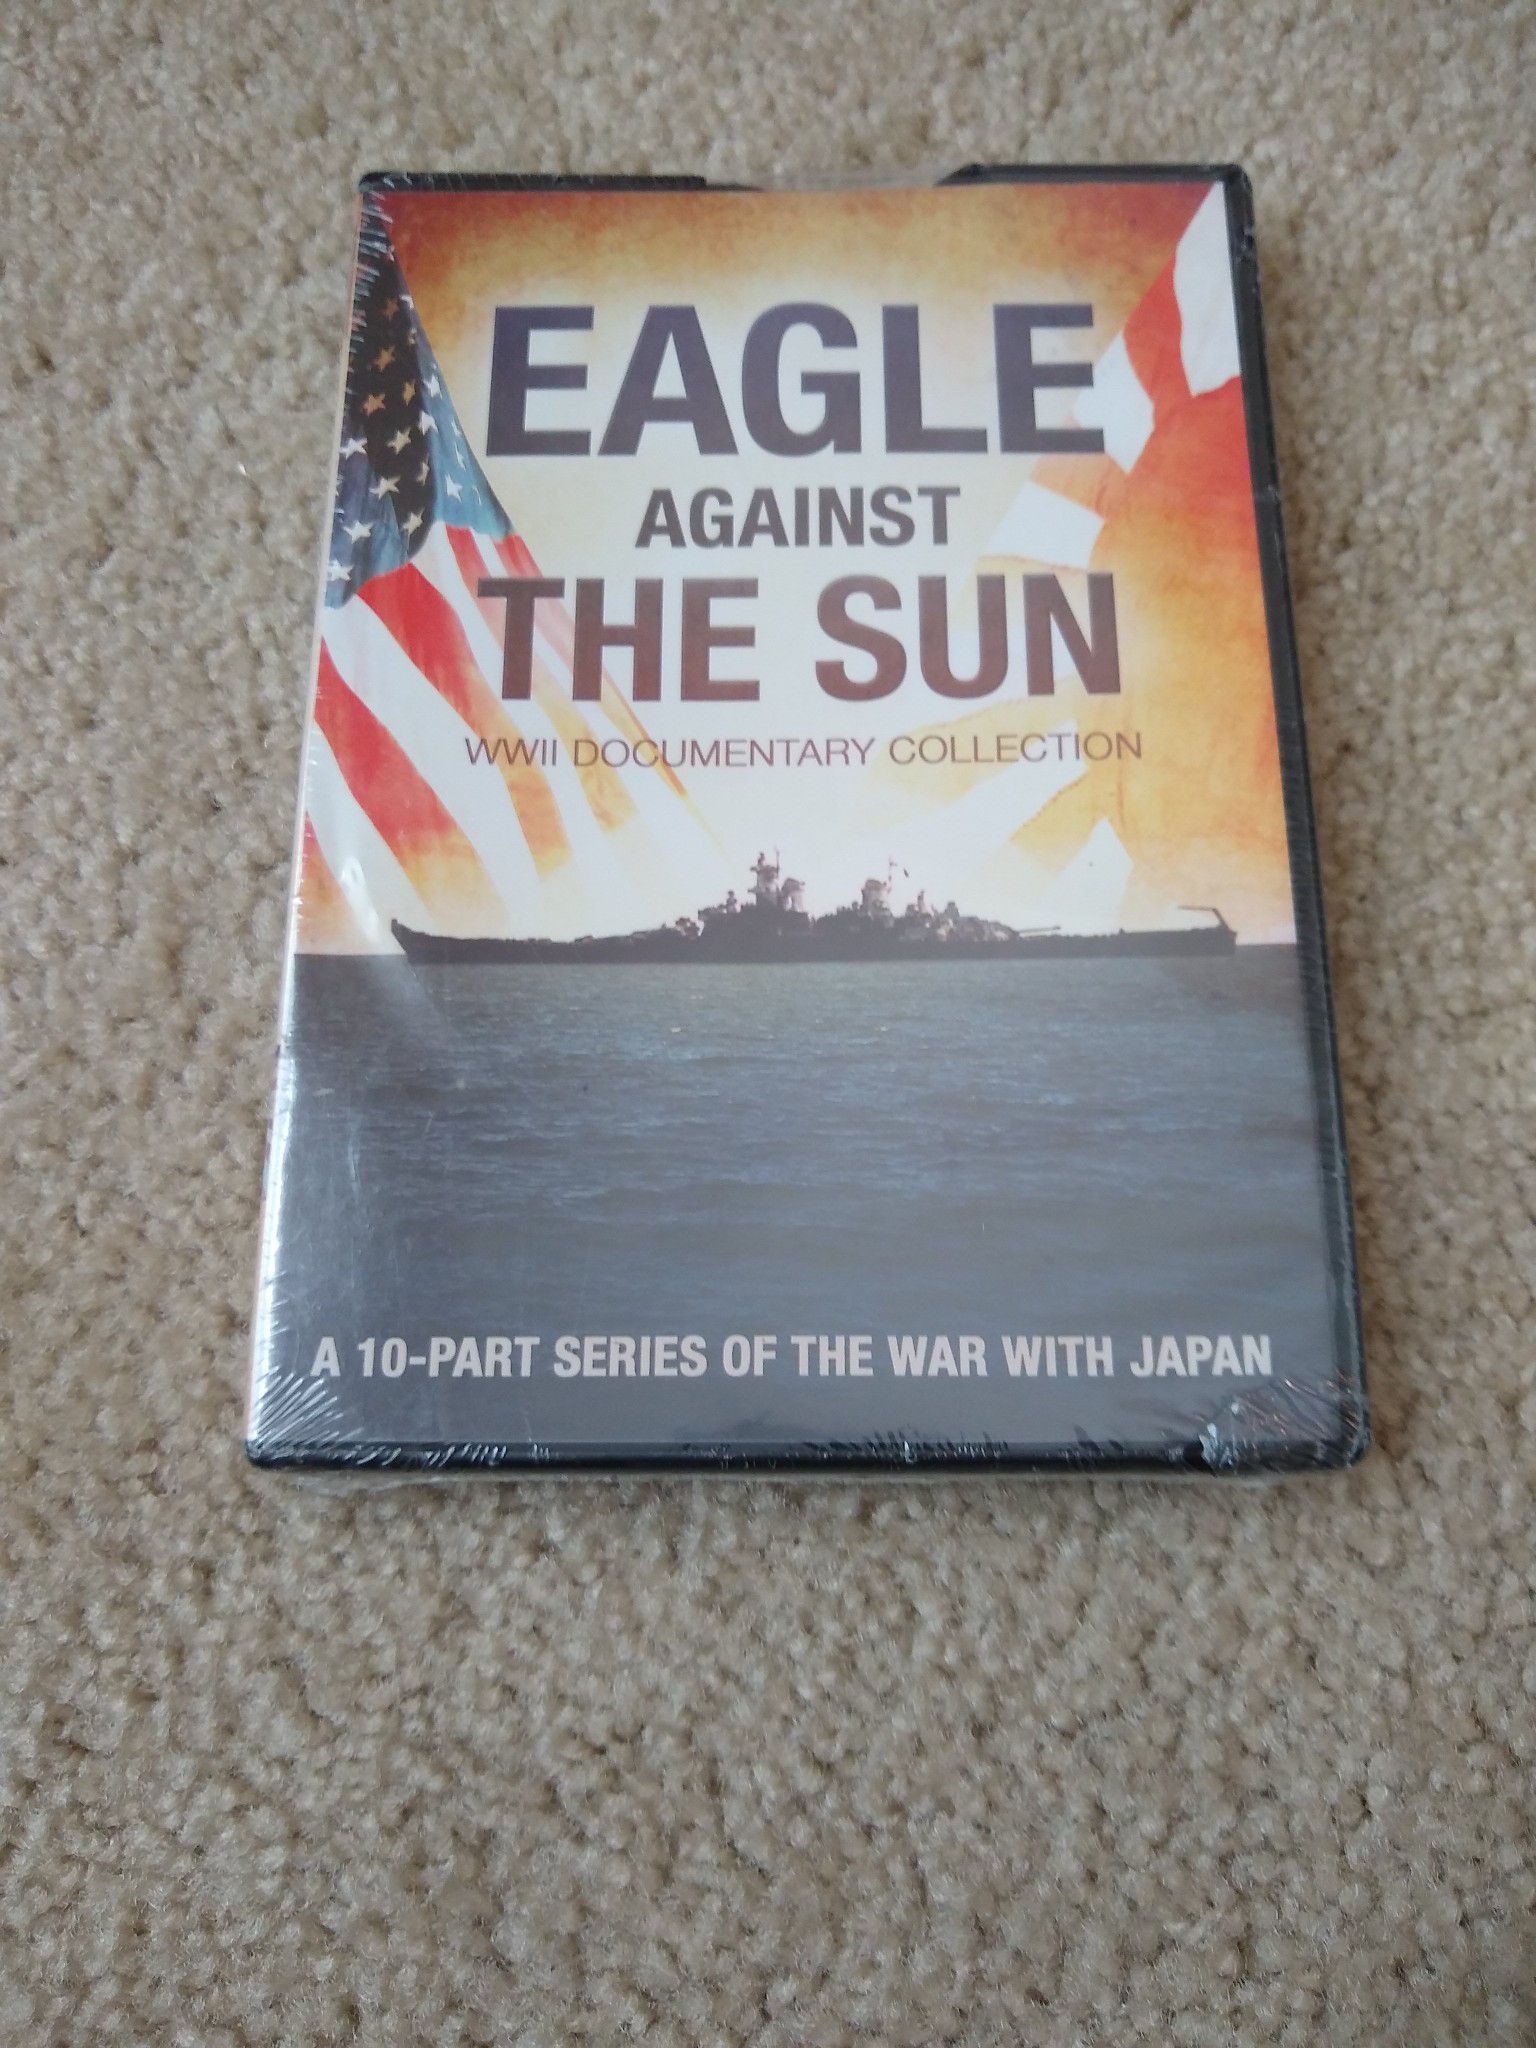 Eagle Against the Sun: WWII Documentary Collection (DVD, 2015, 2-Disc Set)